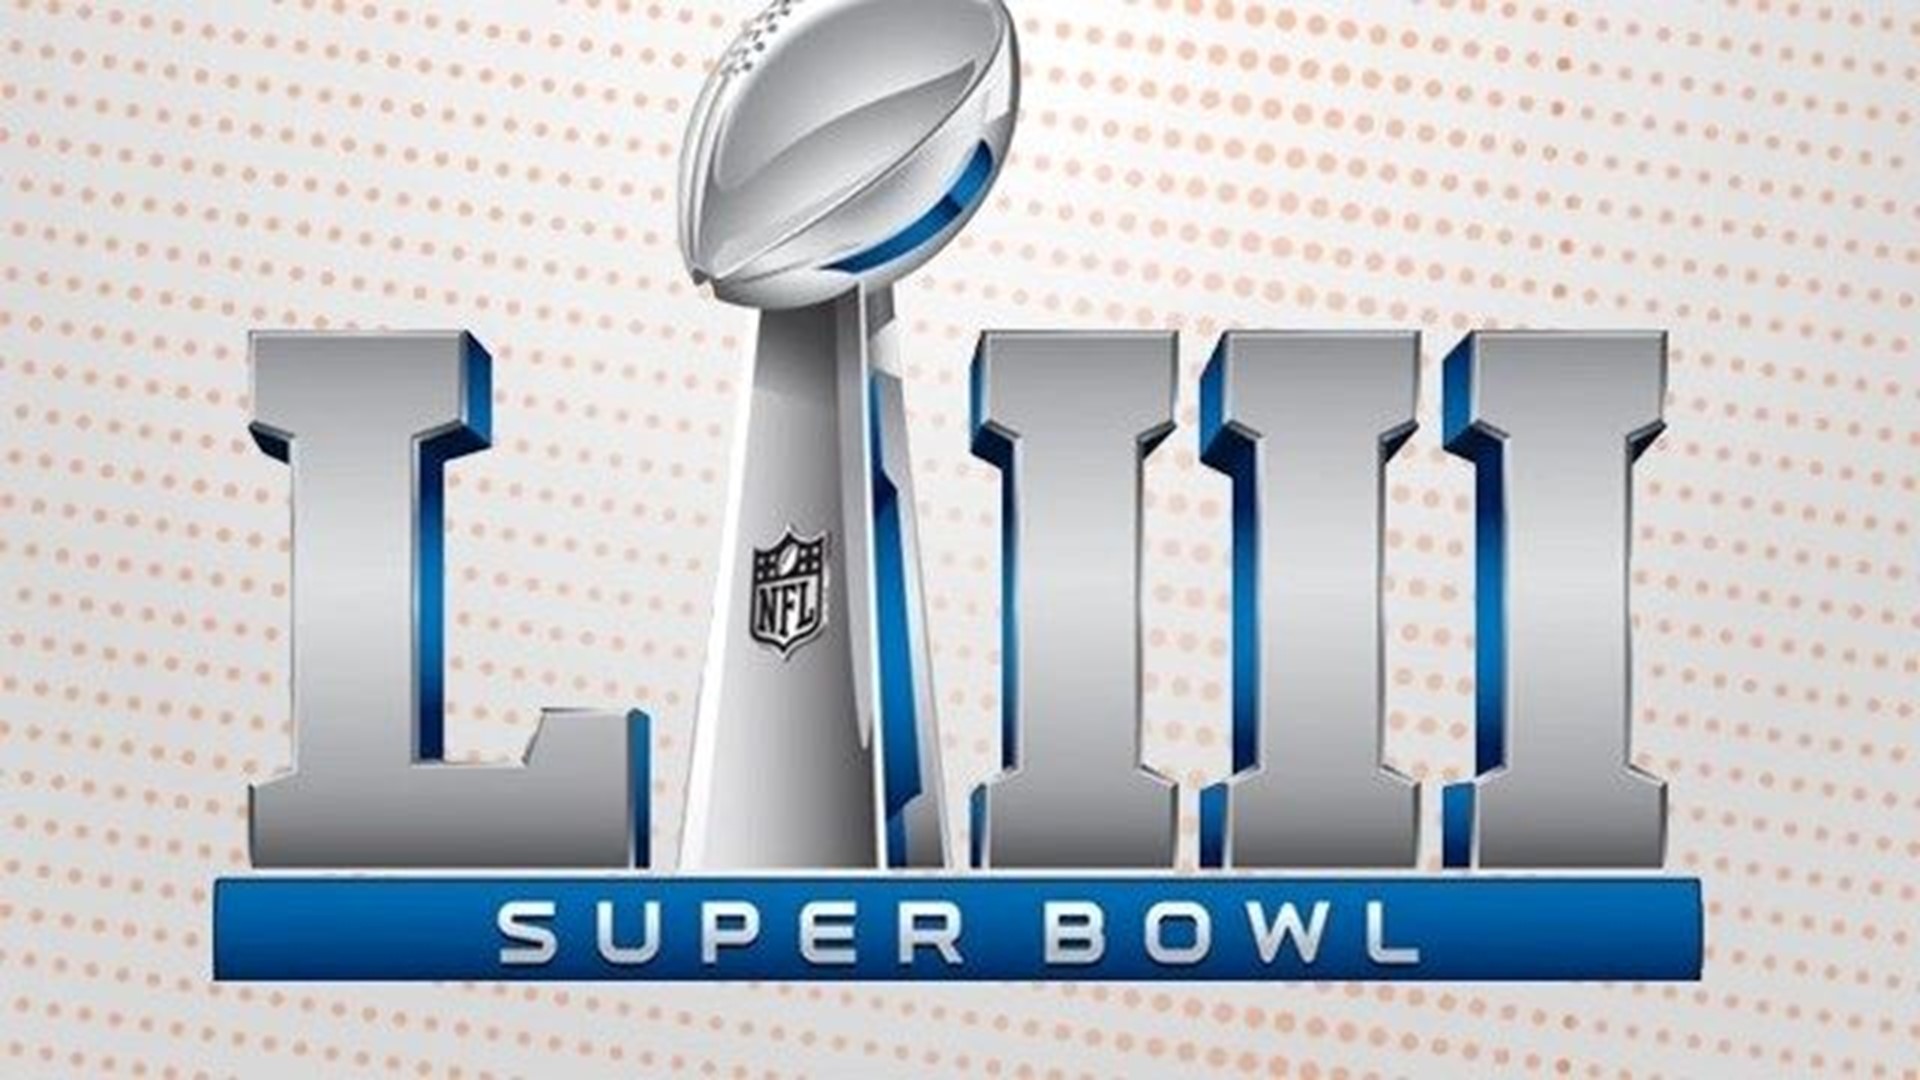 Why does the Super Bowl use Roman numerals?